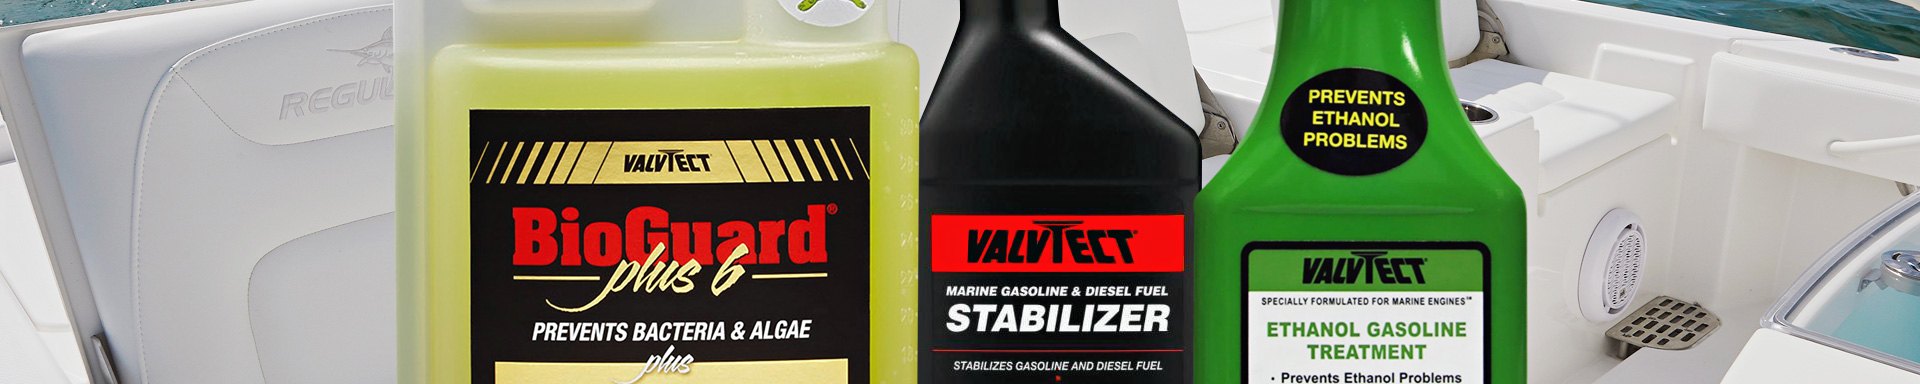 Valvtect Petroleum Cleaners & Chemicals